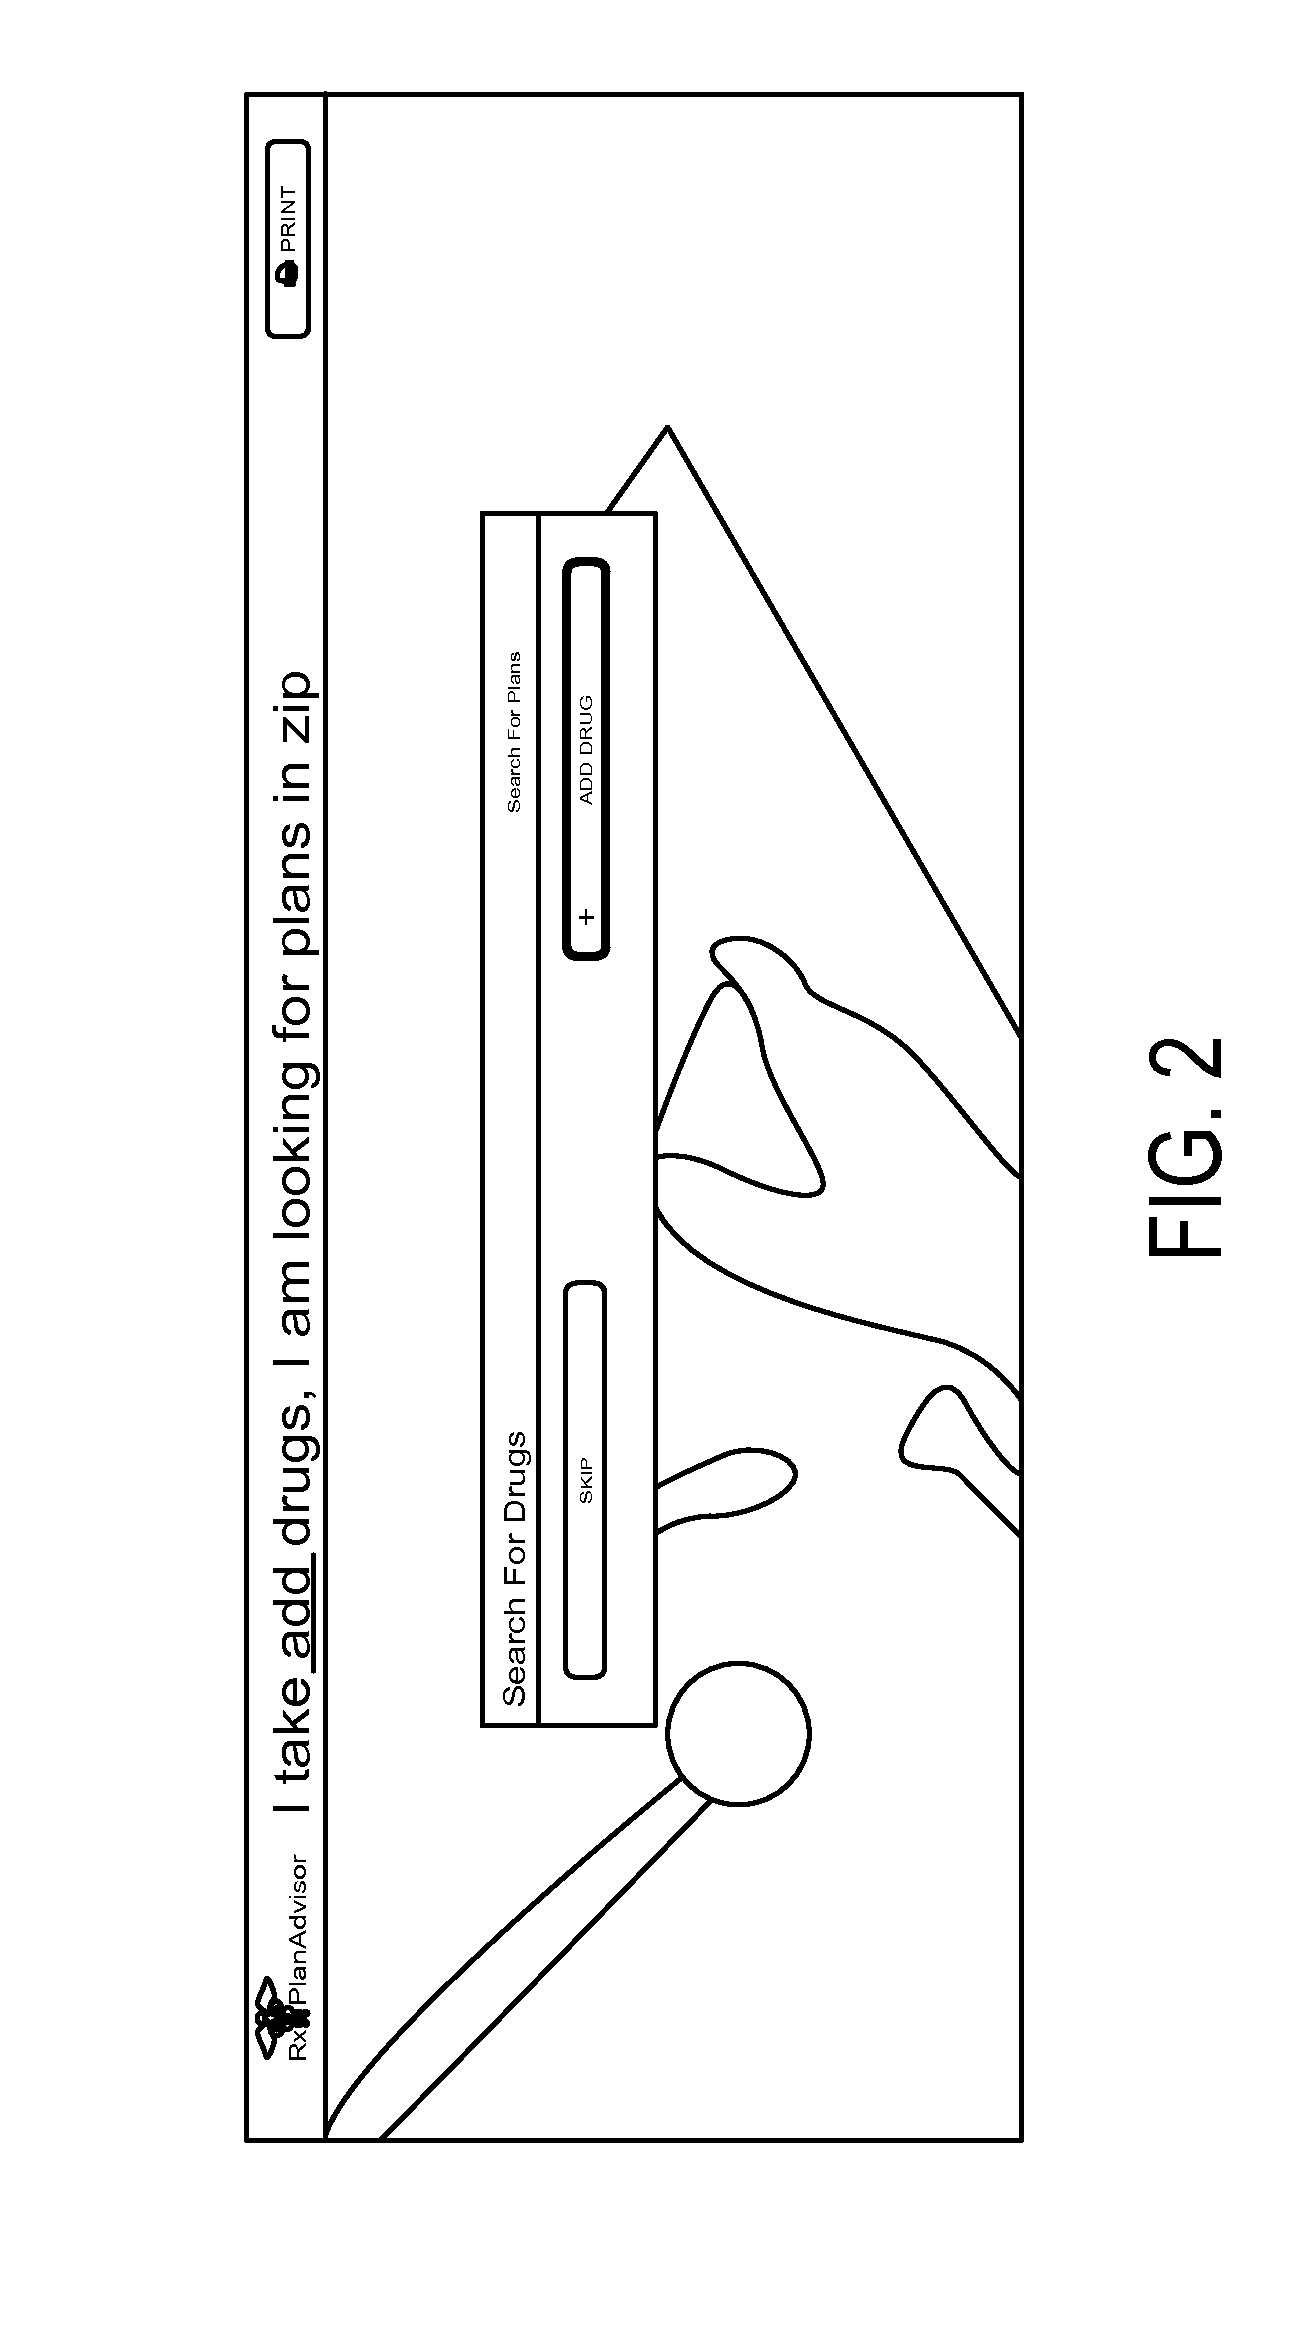 System and method for multi-user evaluation of healthplan benefit based on prescription coverage annual cost